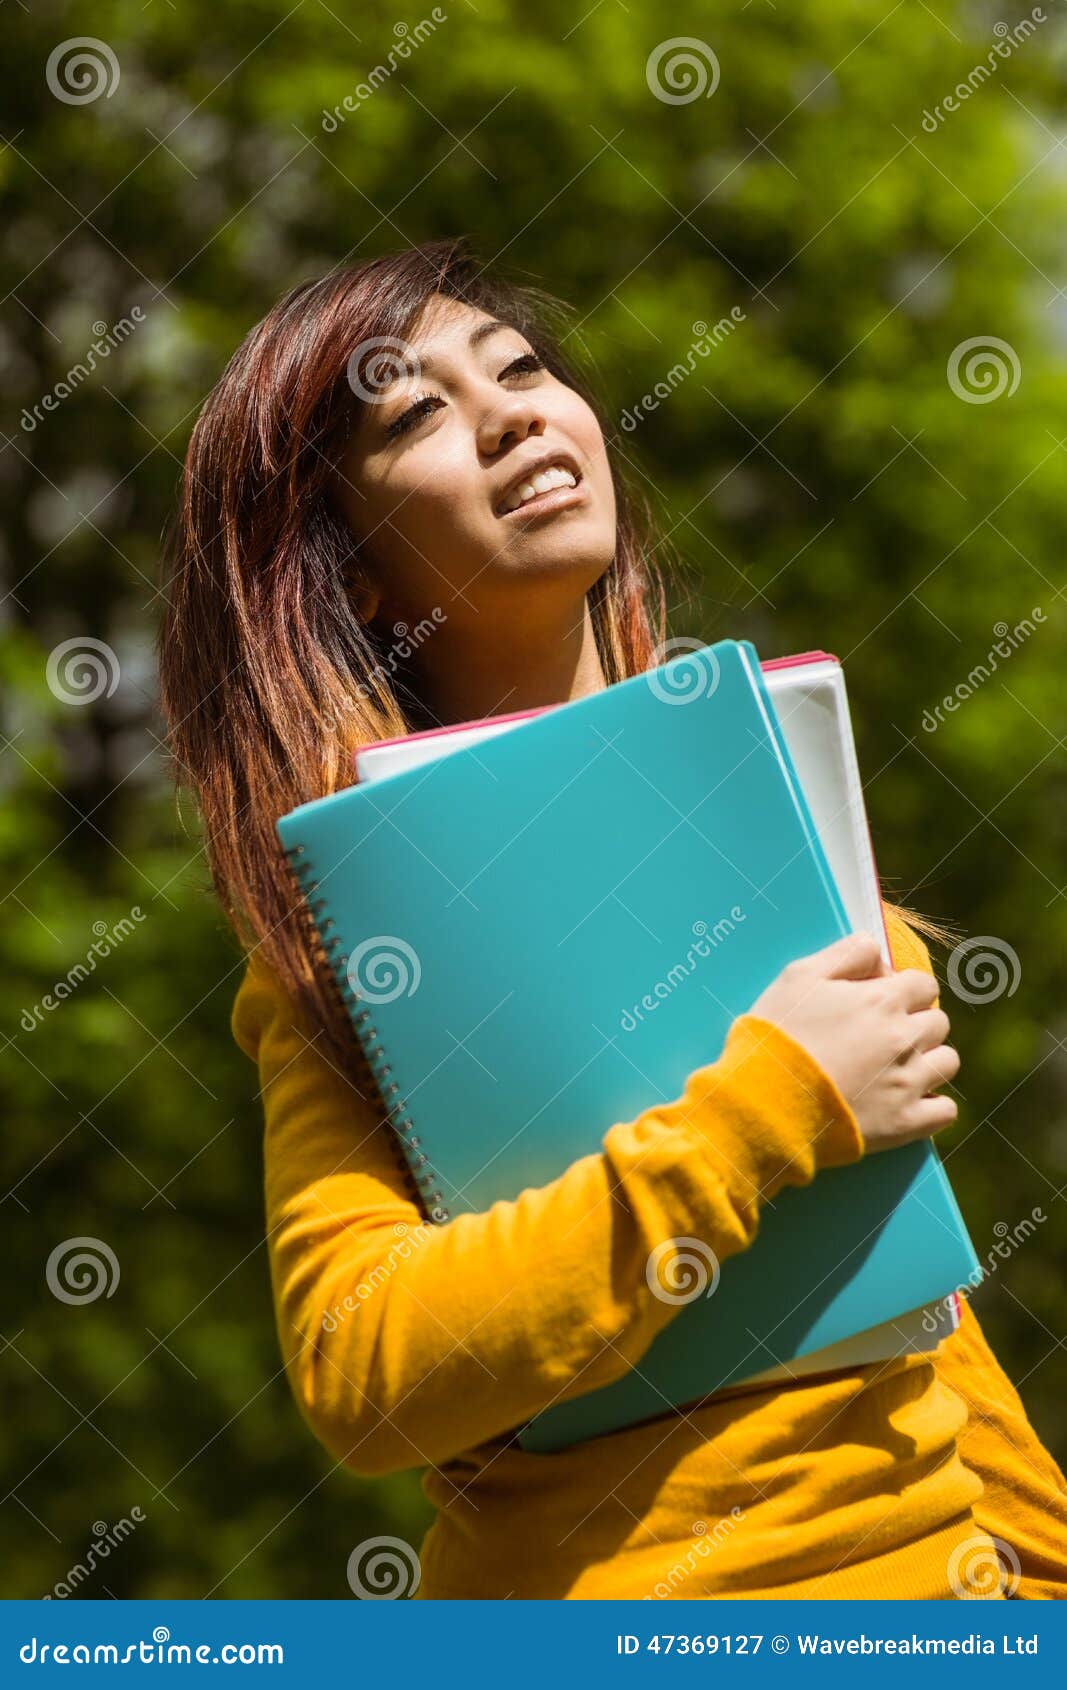 Female College Student With Books In Park Stock Image Image Of